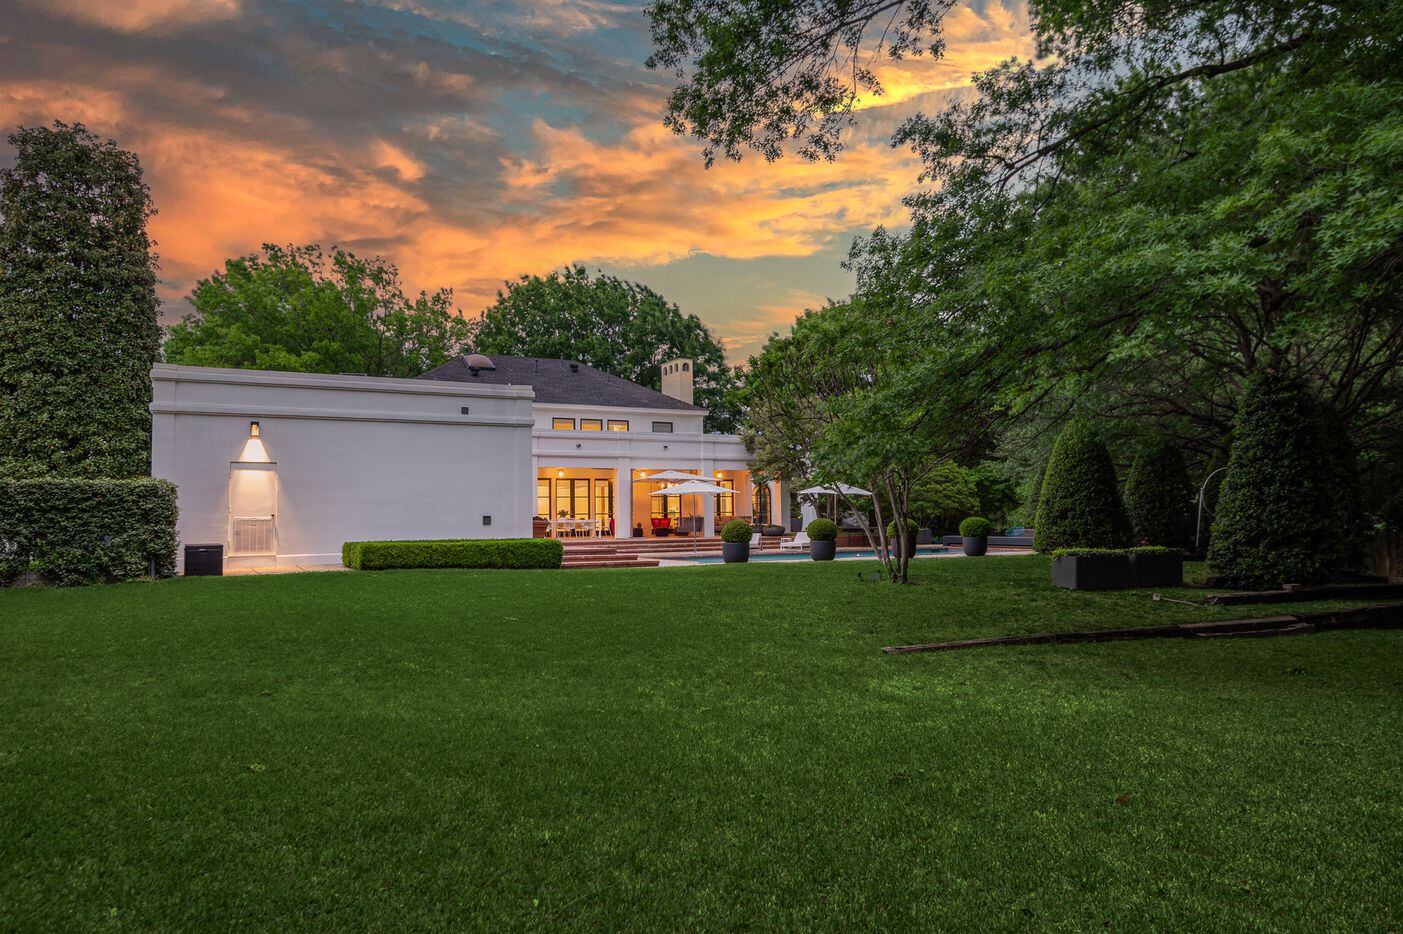 Check out the house at 6210 Raintree Court in Dallas.